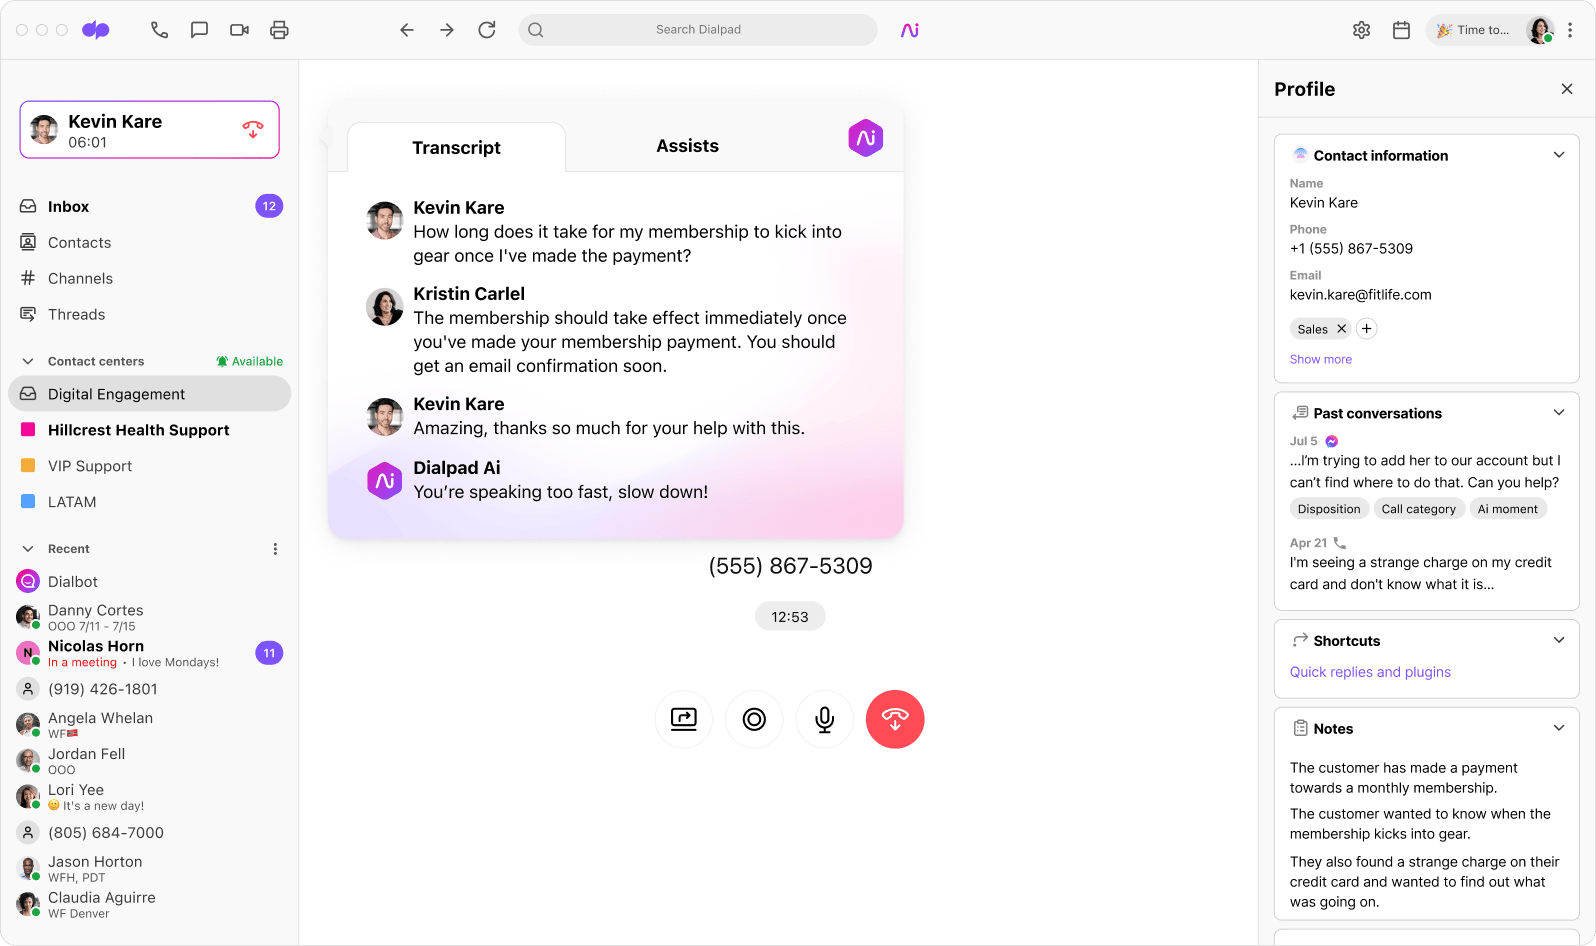 Screenshot of Dialpads call interface with Dialpad Ai running a live transcript which includes an automated note to speak slower